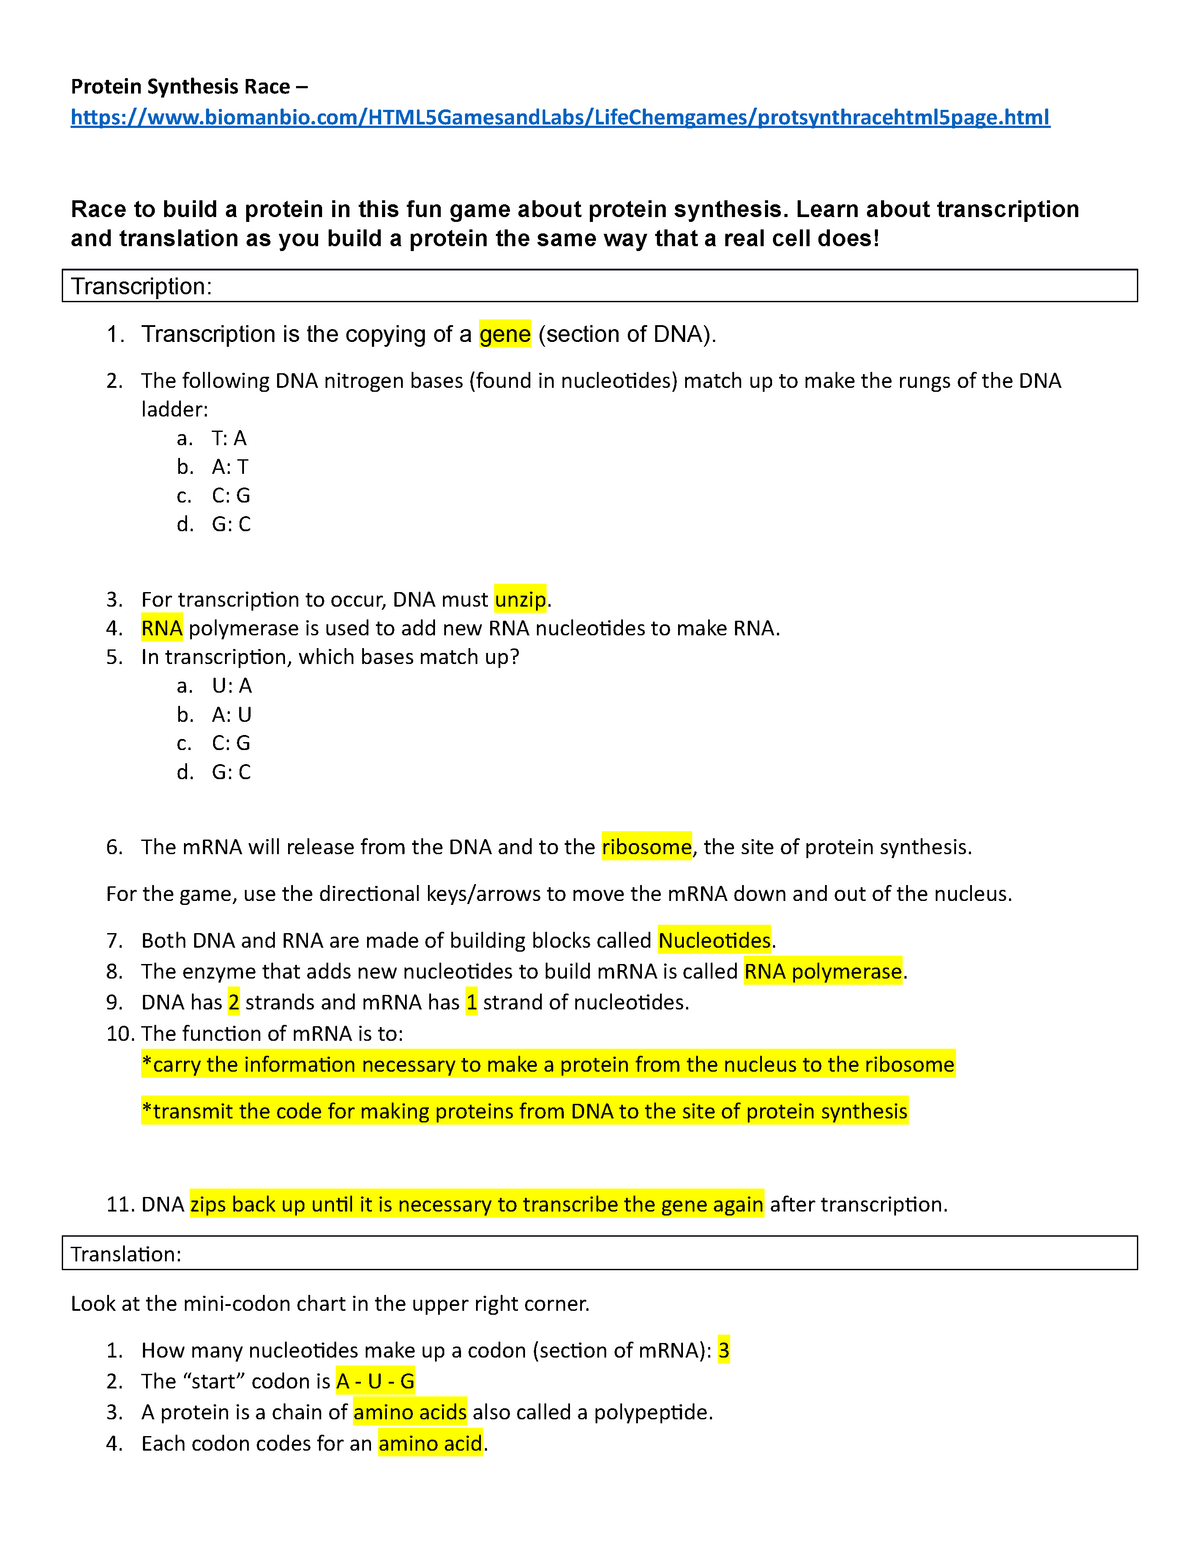 Protein Synthesis Race worksheet Stensgaard - Protein Synthesis In Protein Synthesis Review Worksheet Answers